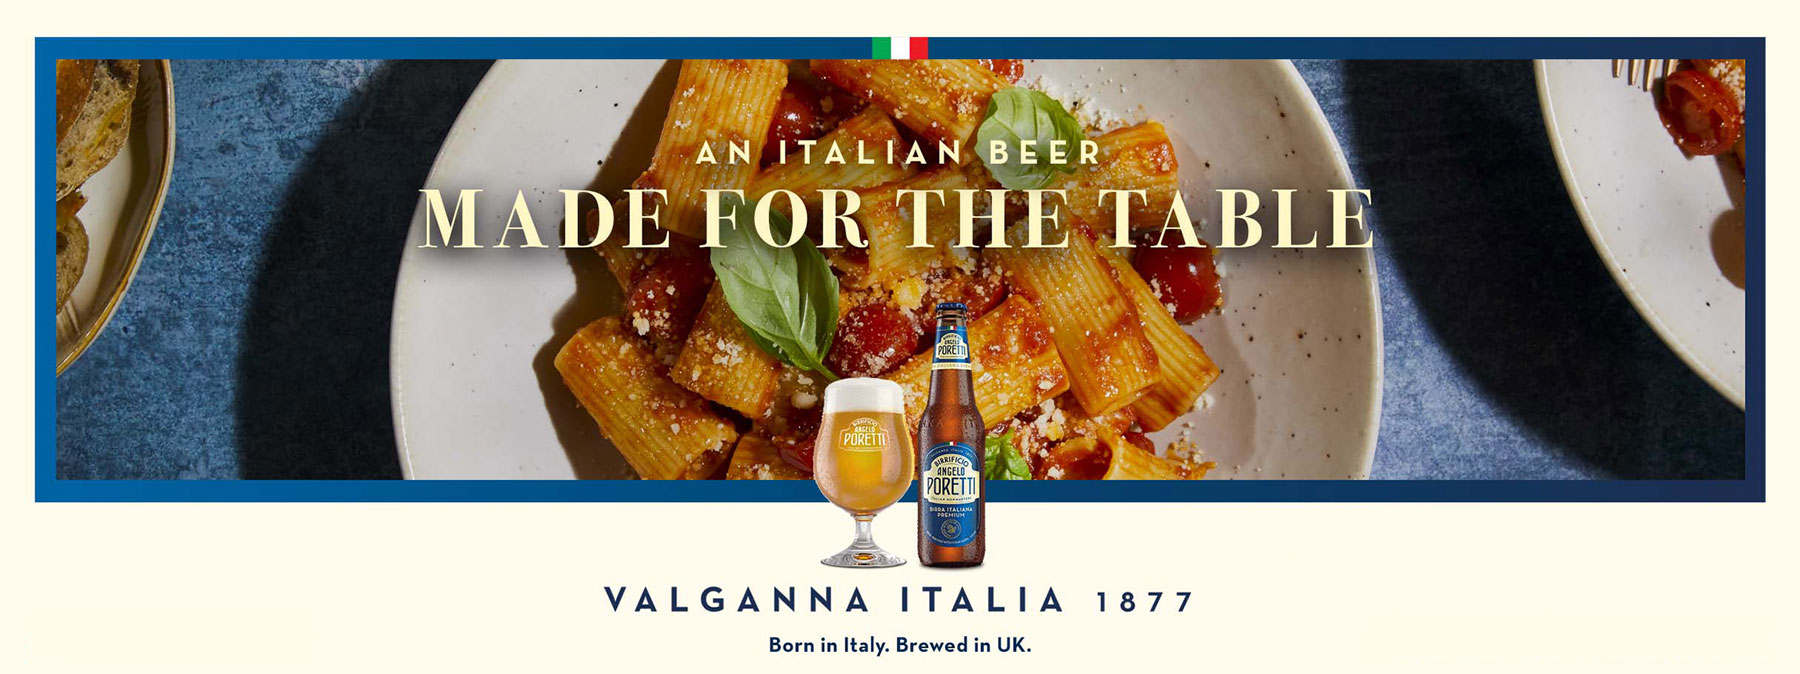 An Italian beer made for the table